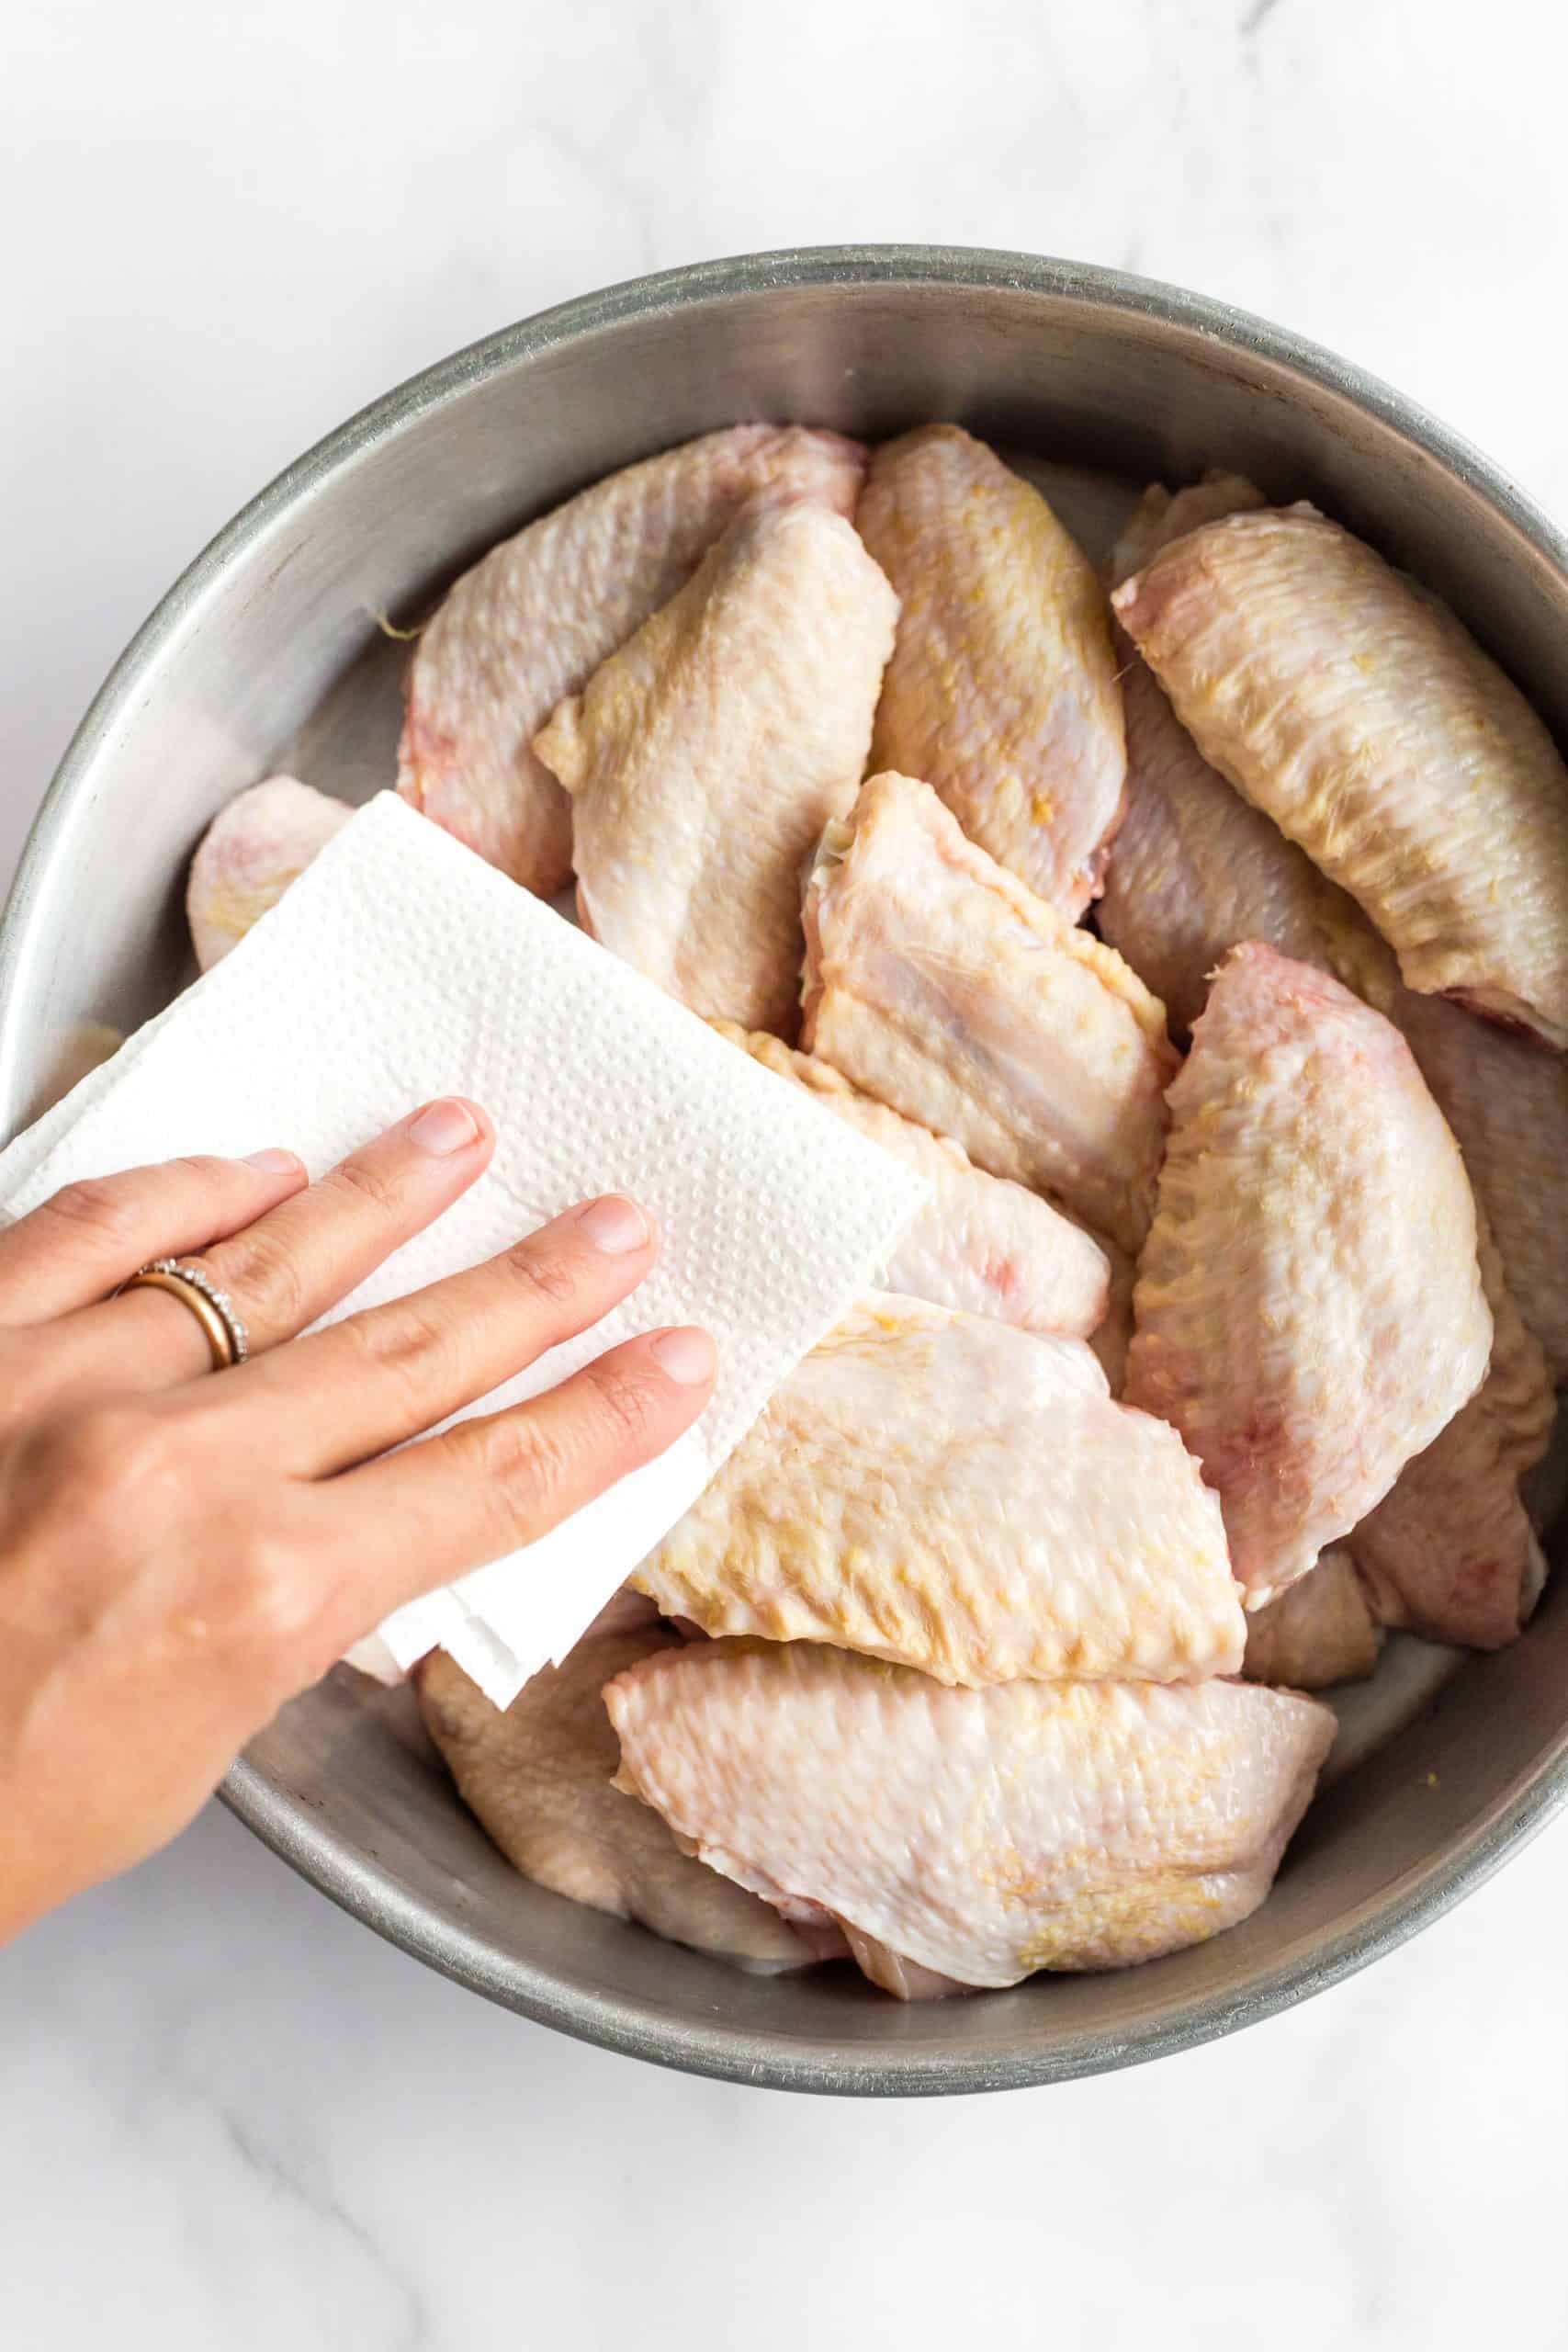 A hand patting the chicken wings dry with a paper towel.